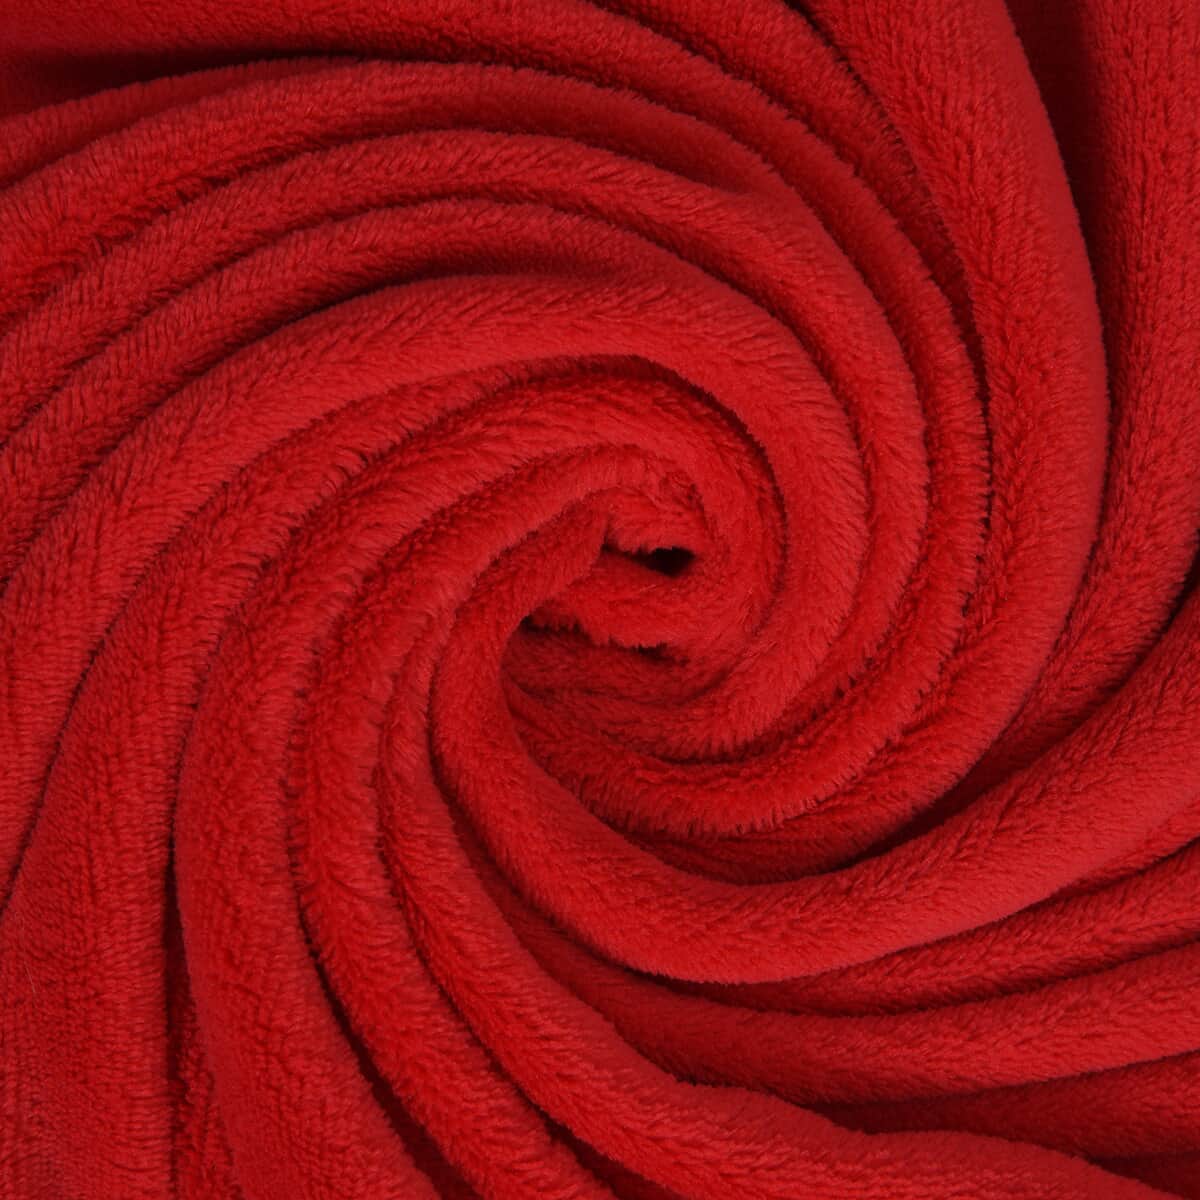 HOMESMART Toreador Solid Coral Fleece Warmth and Soft Blanket (50"x70") image number 3